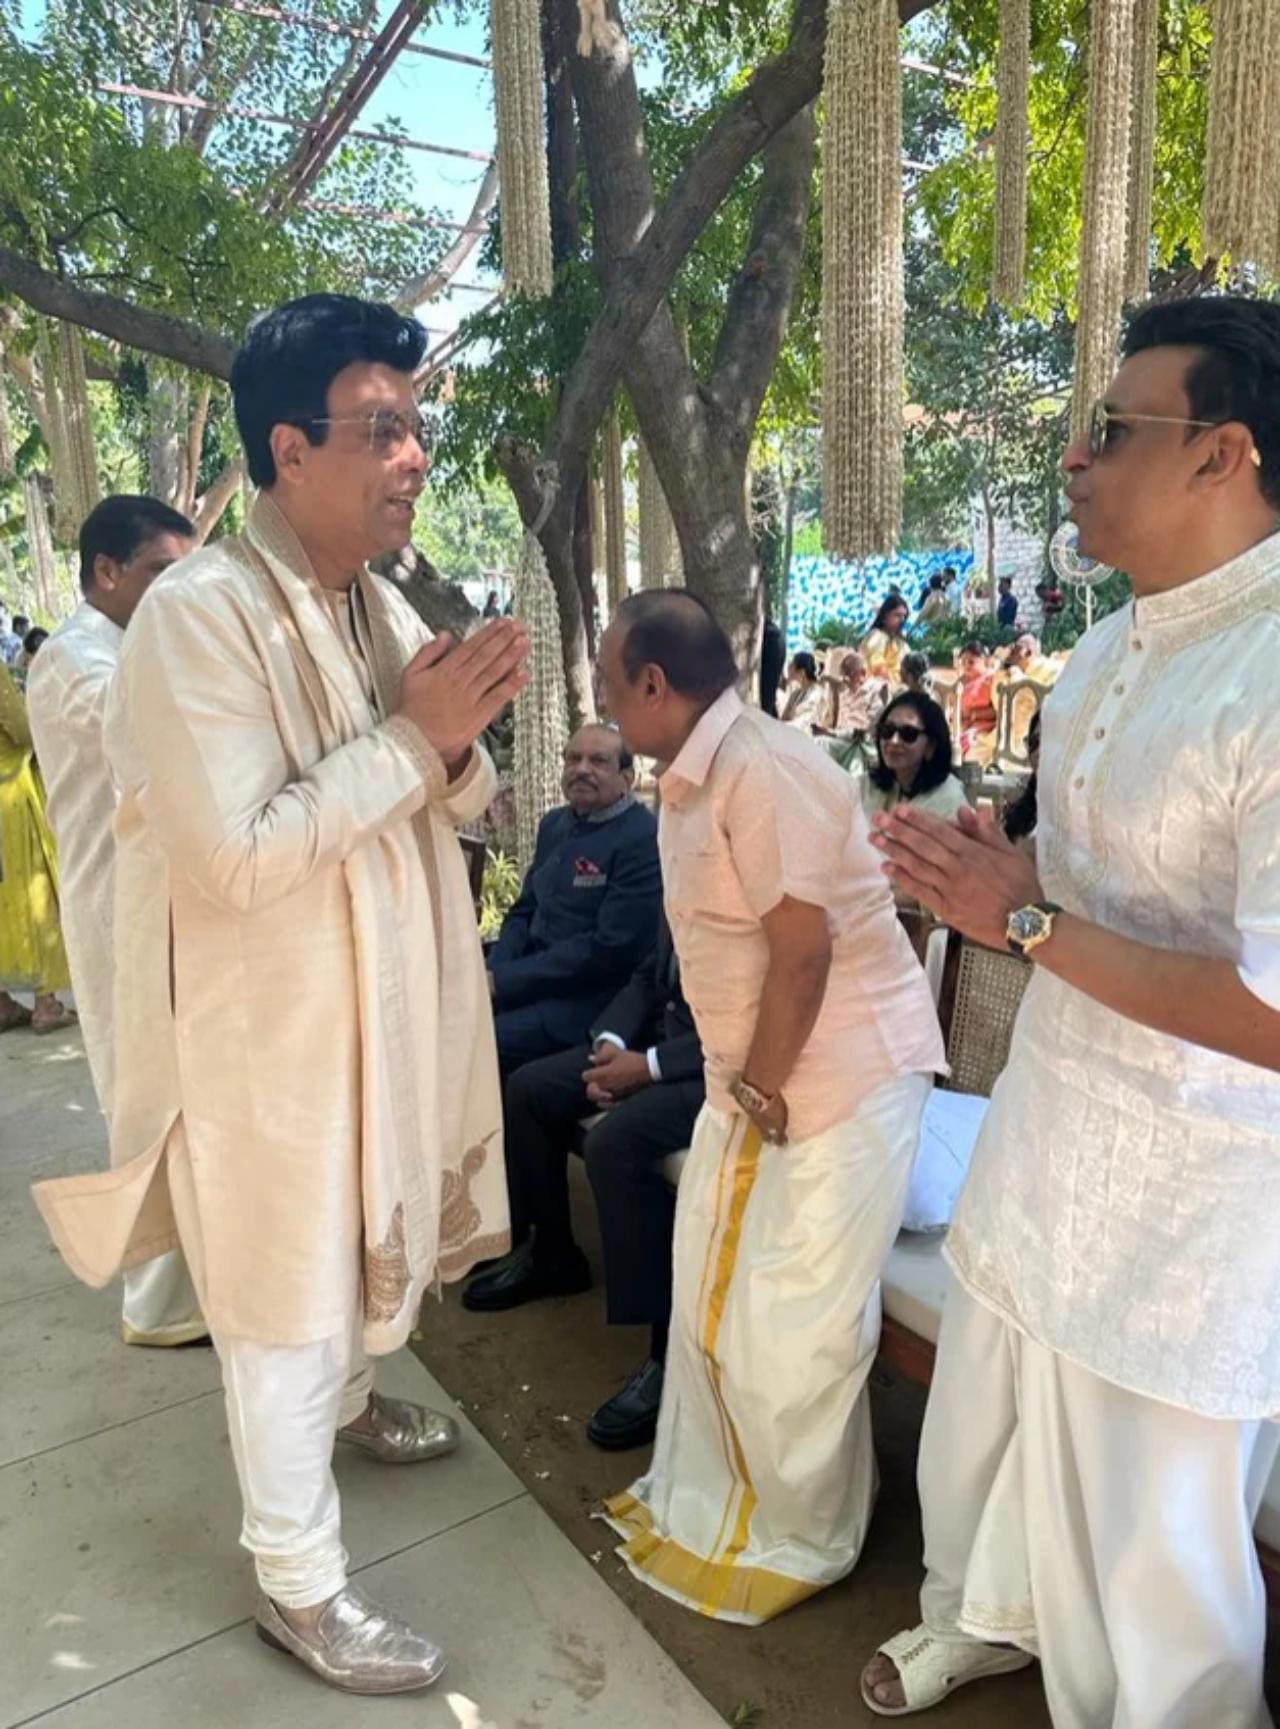 All the stars were seen in shades of white for the day wedding. Karan Johar who attended the Jaipur wedding after attending Sidharth and Kiara's wedding arrived in the city along with Mohanlal. The Malayalam film superstar had earlier shared a picture with Karan posing on a private plane